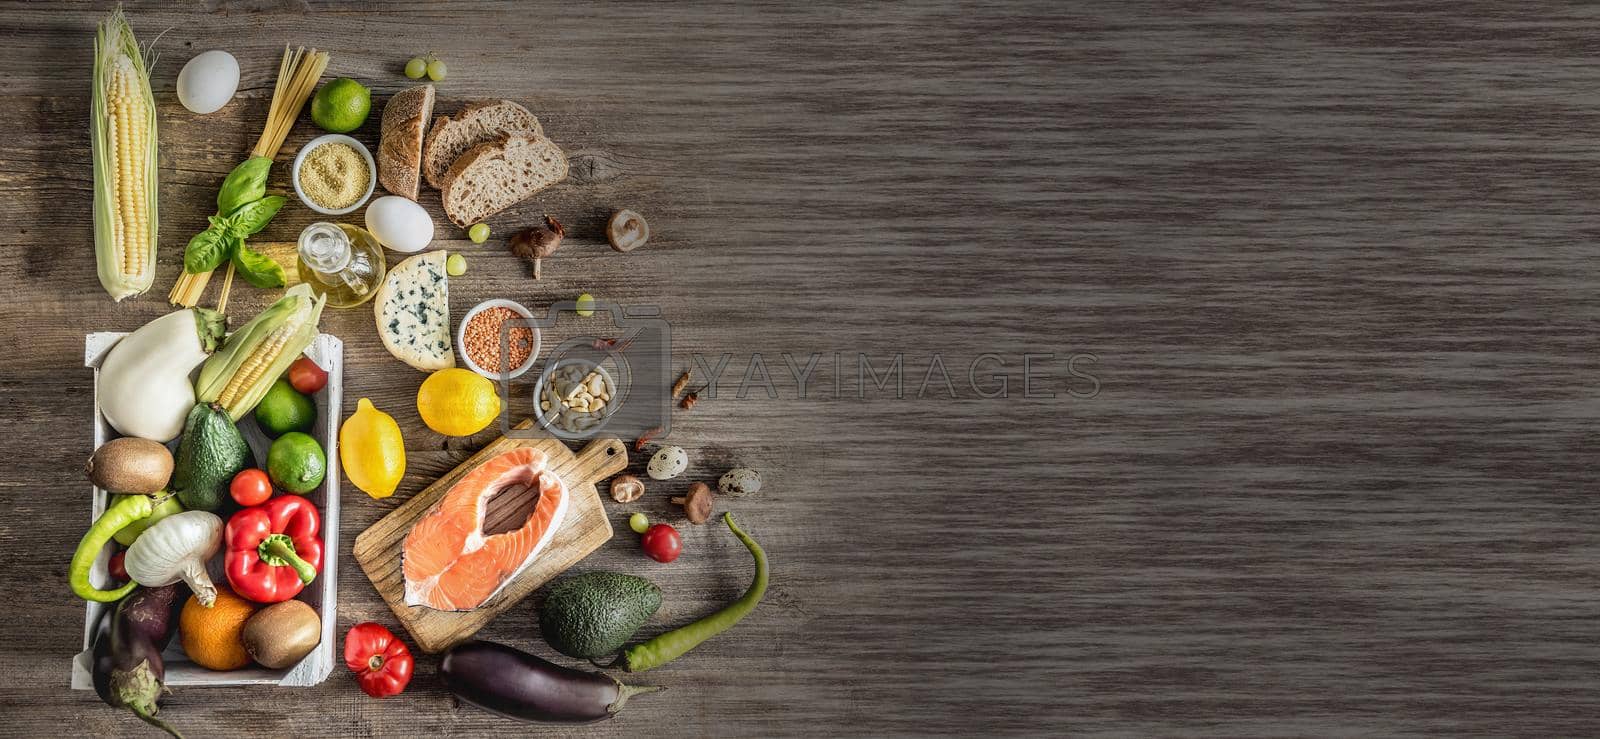 Royalty free image of Plenty of foods on the wooden table. by tan4ikk1